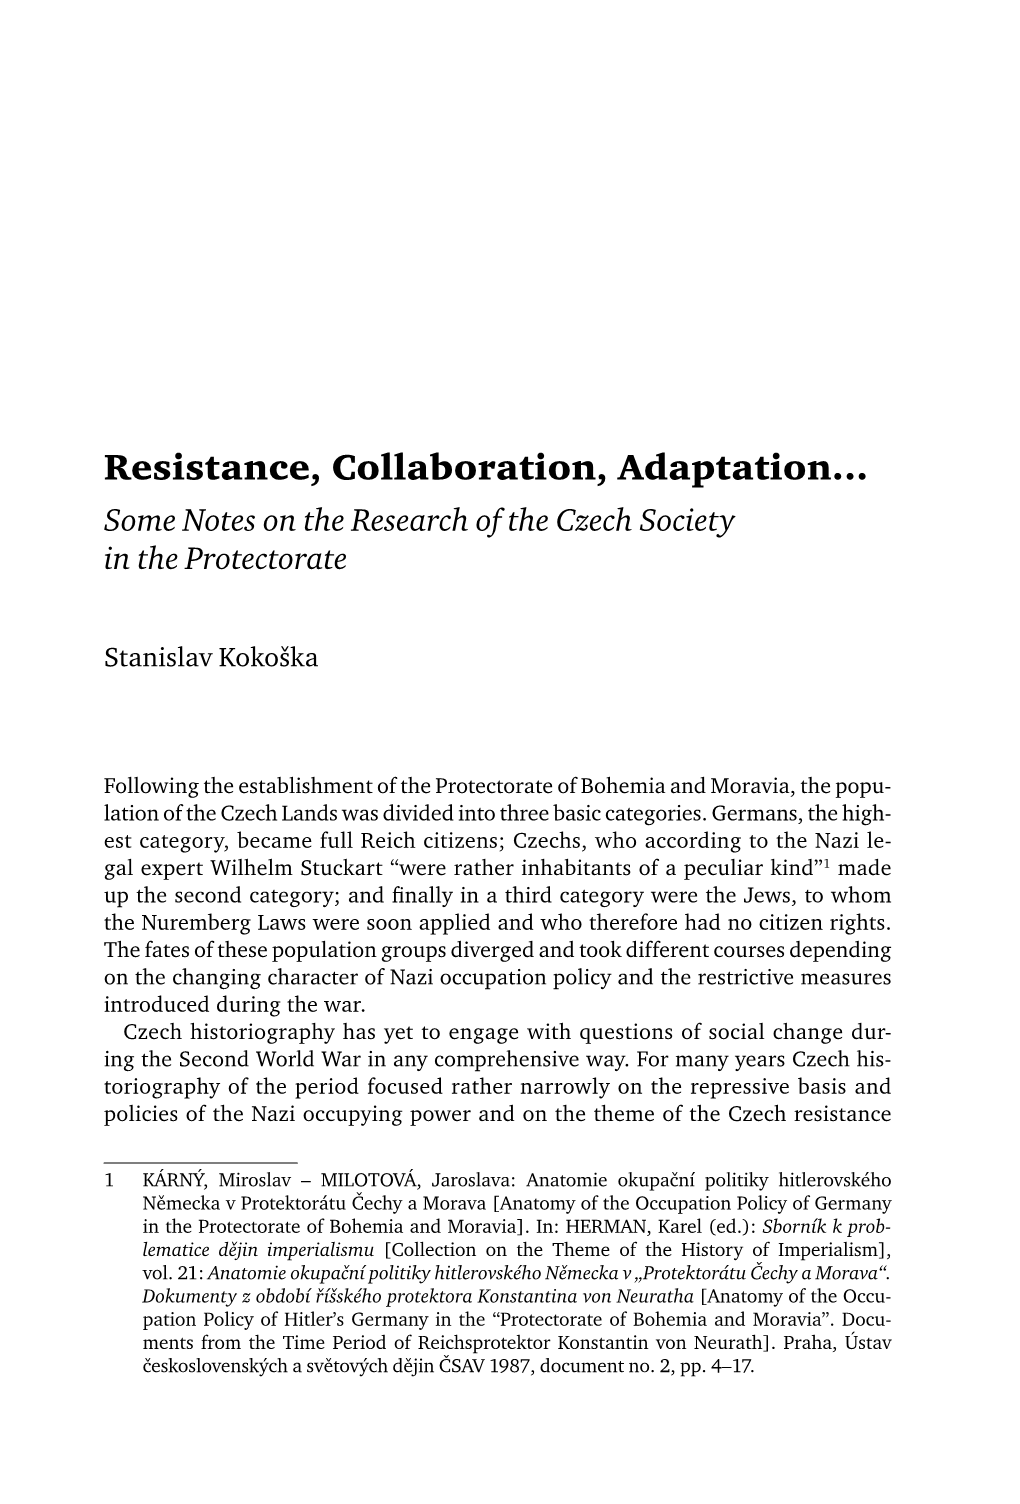 Resistance, Collaboration, Adaptation… Some Notes on the Research of the Czech Society in the Protectorate